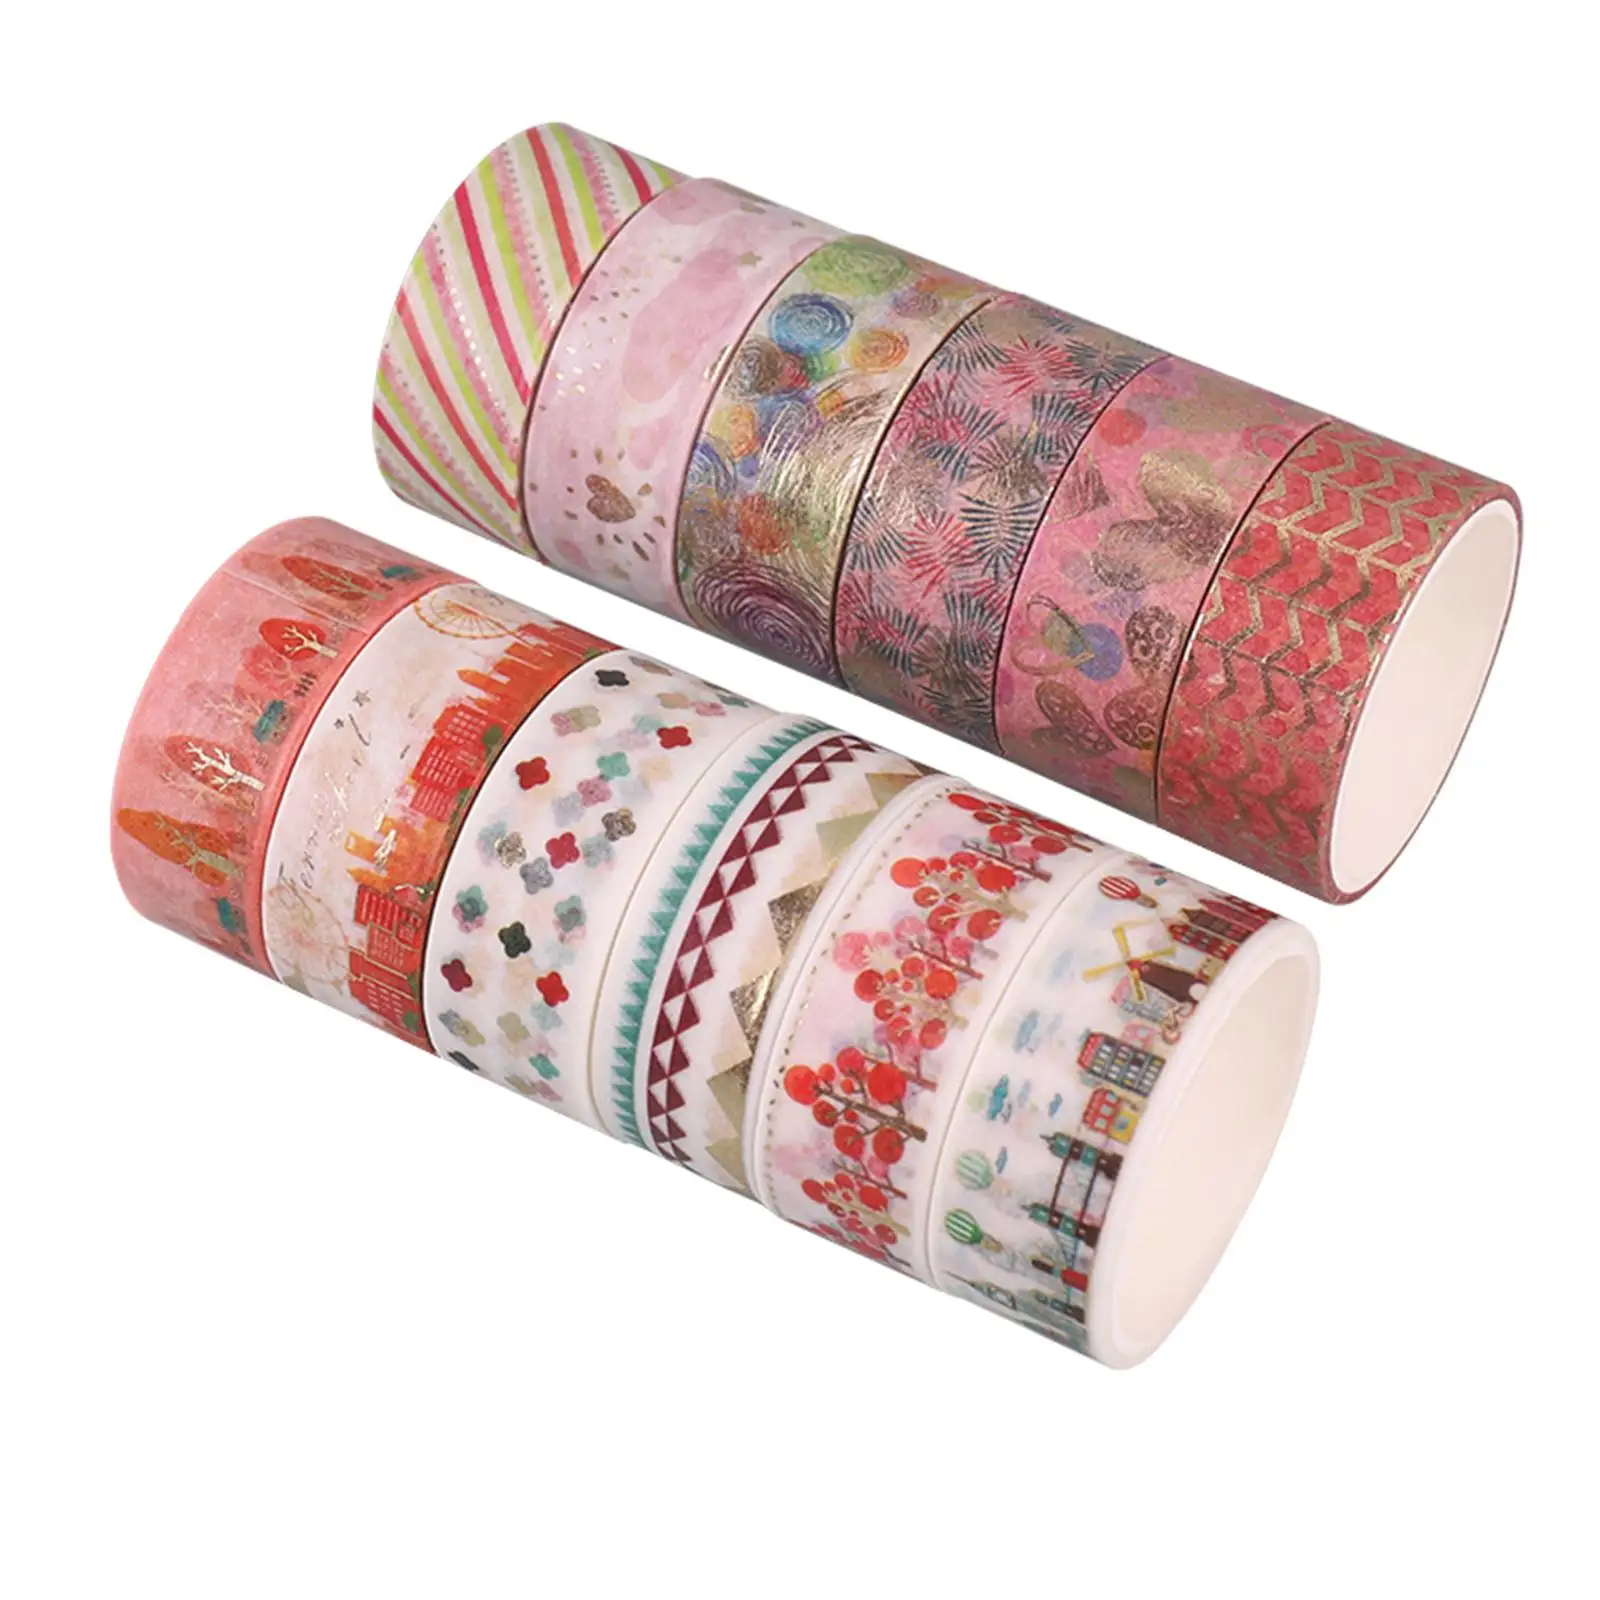 12 Rolls Washi Tape Set Gold Foil Washi Tape Crafts Masking Tapes for Gift Wrapping Journaling Party Album Scrapbooking Supplies